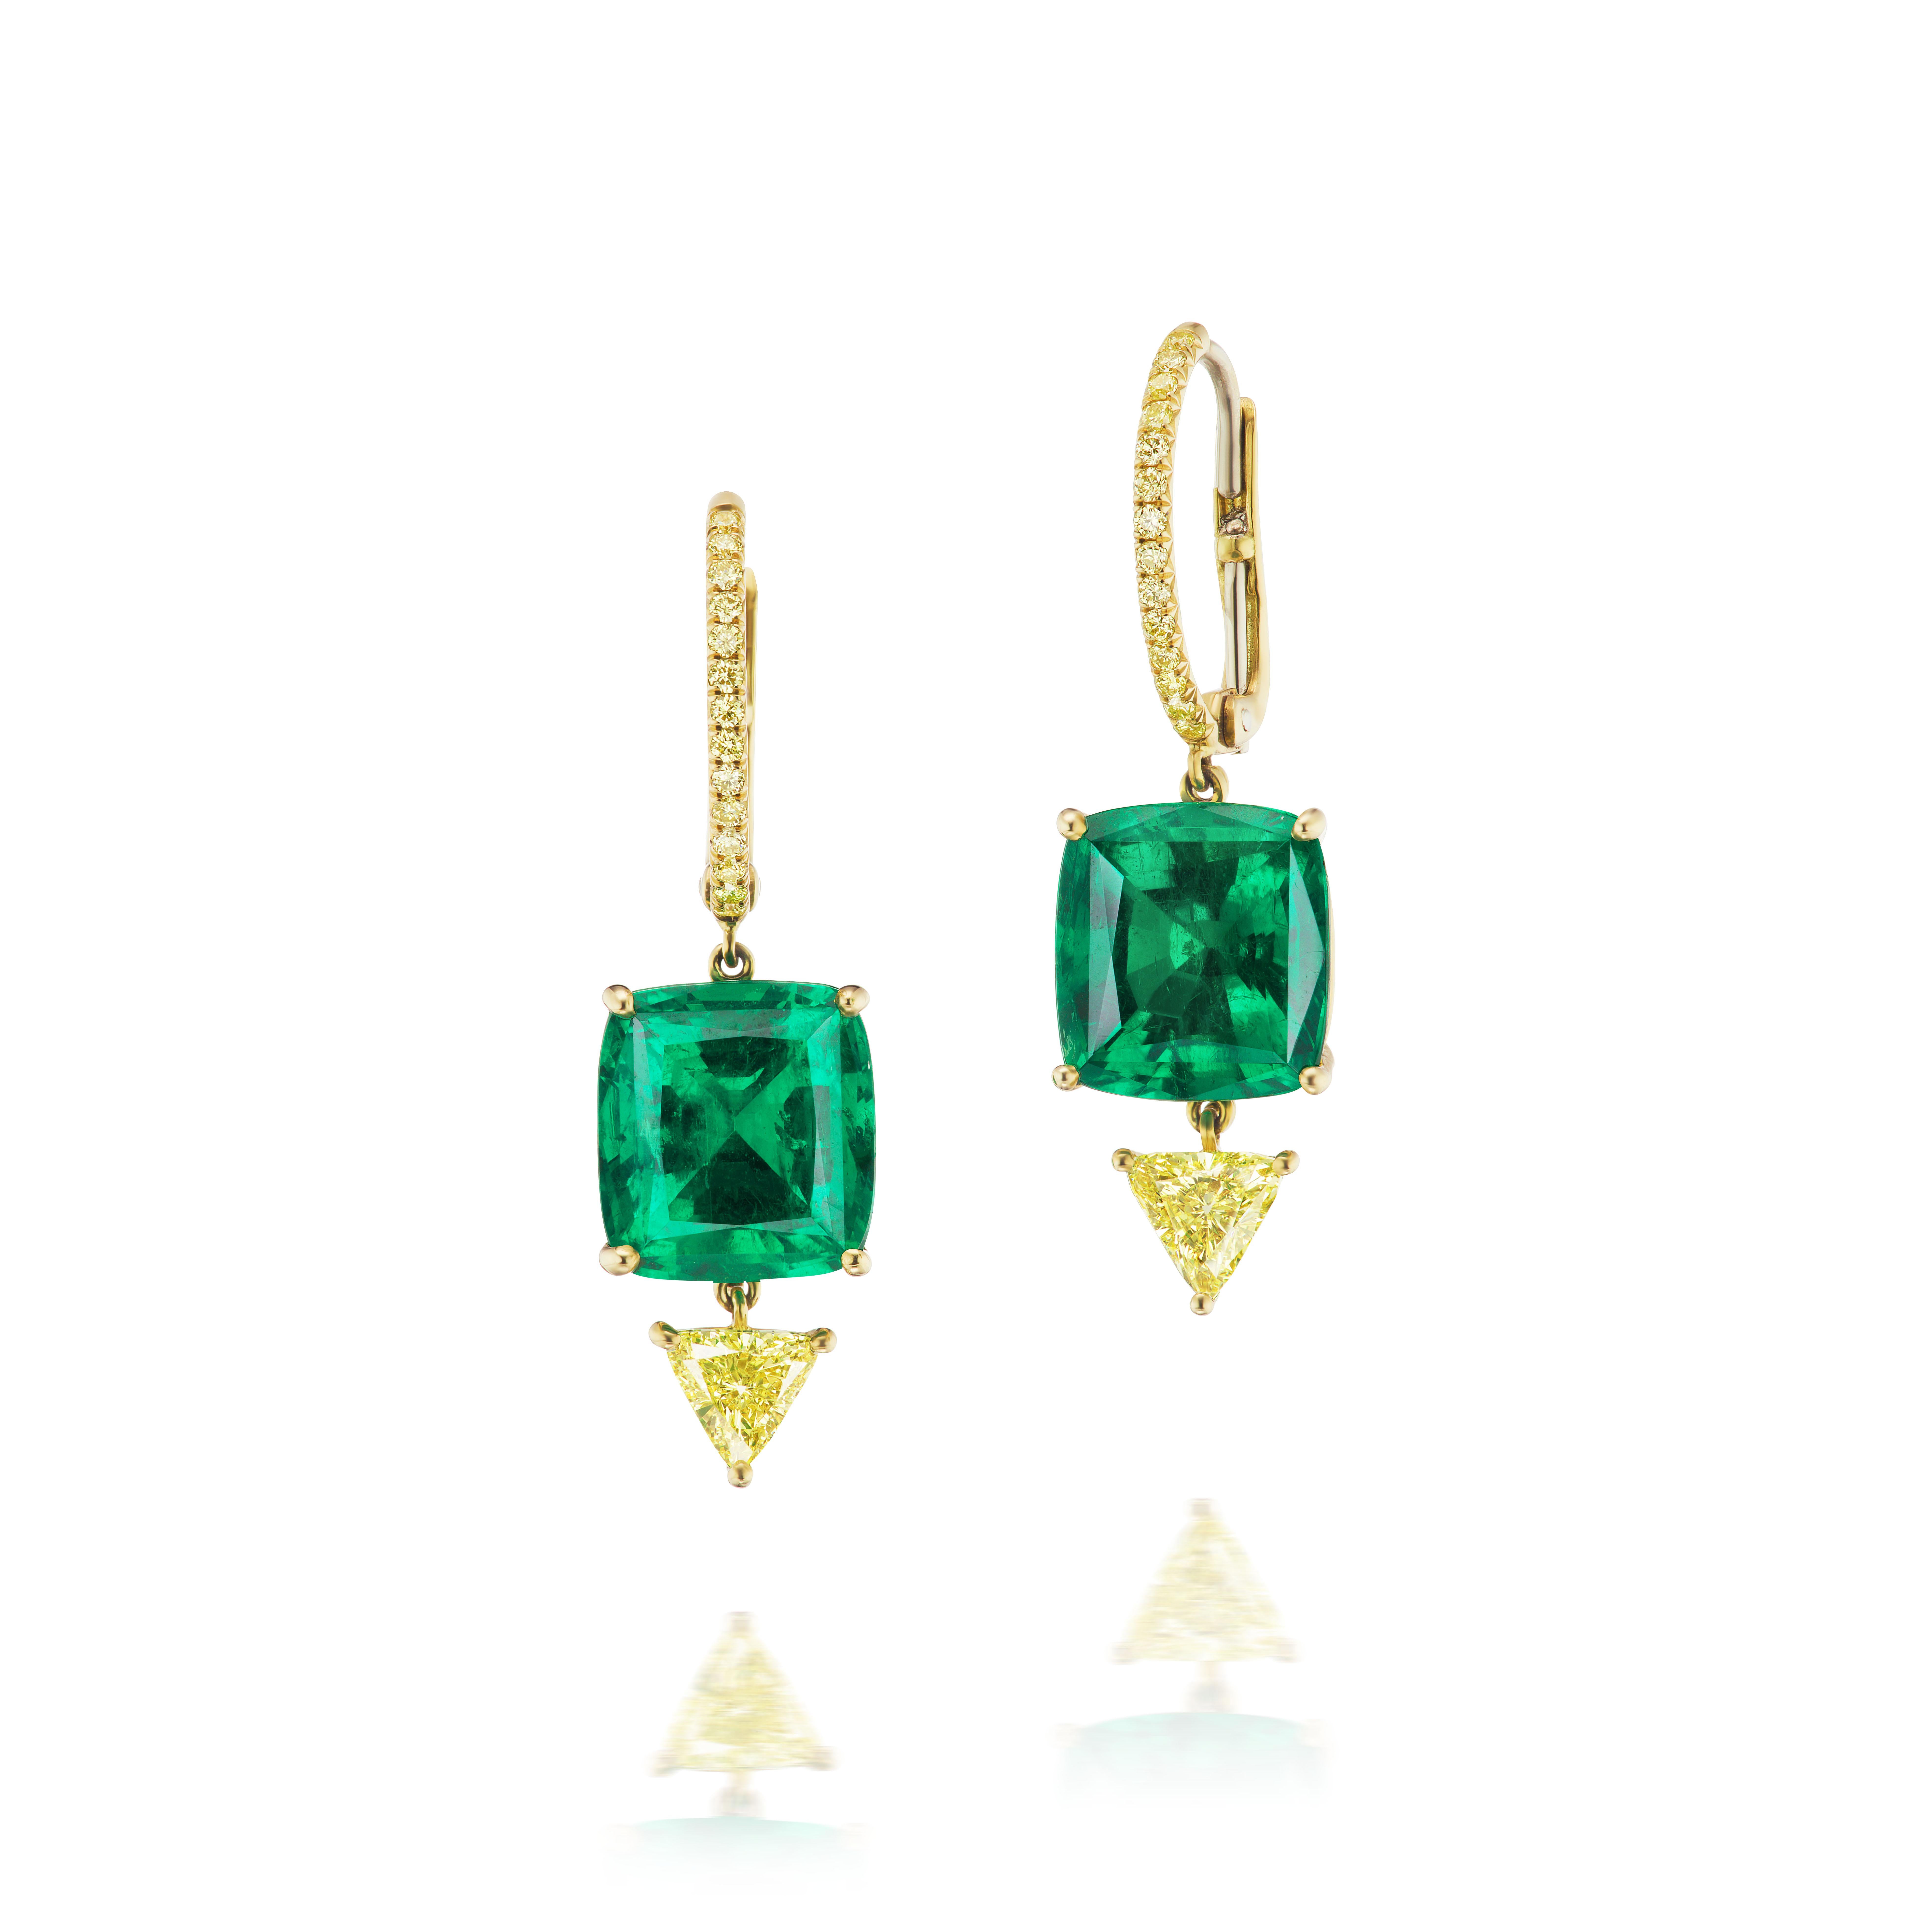 Contemporary 4 Carat Each Colombian Emerald and Yellow Diamond 18K Gold Earrings